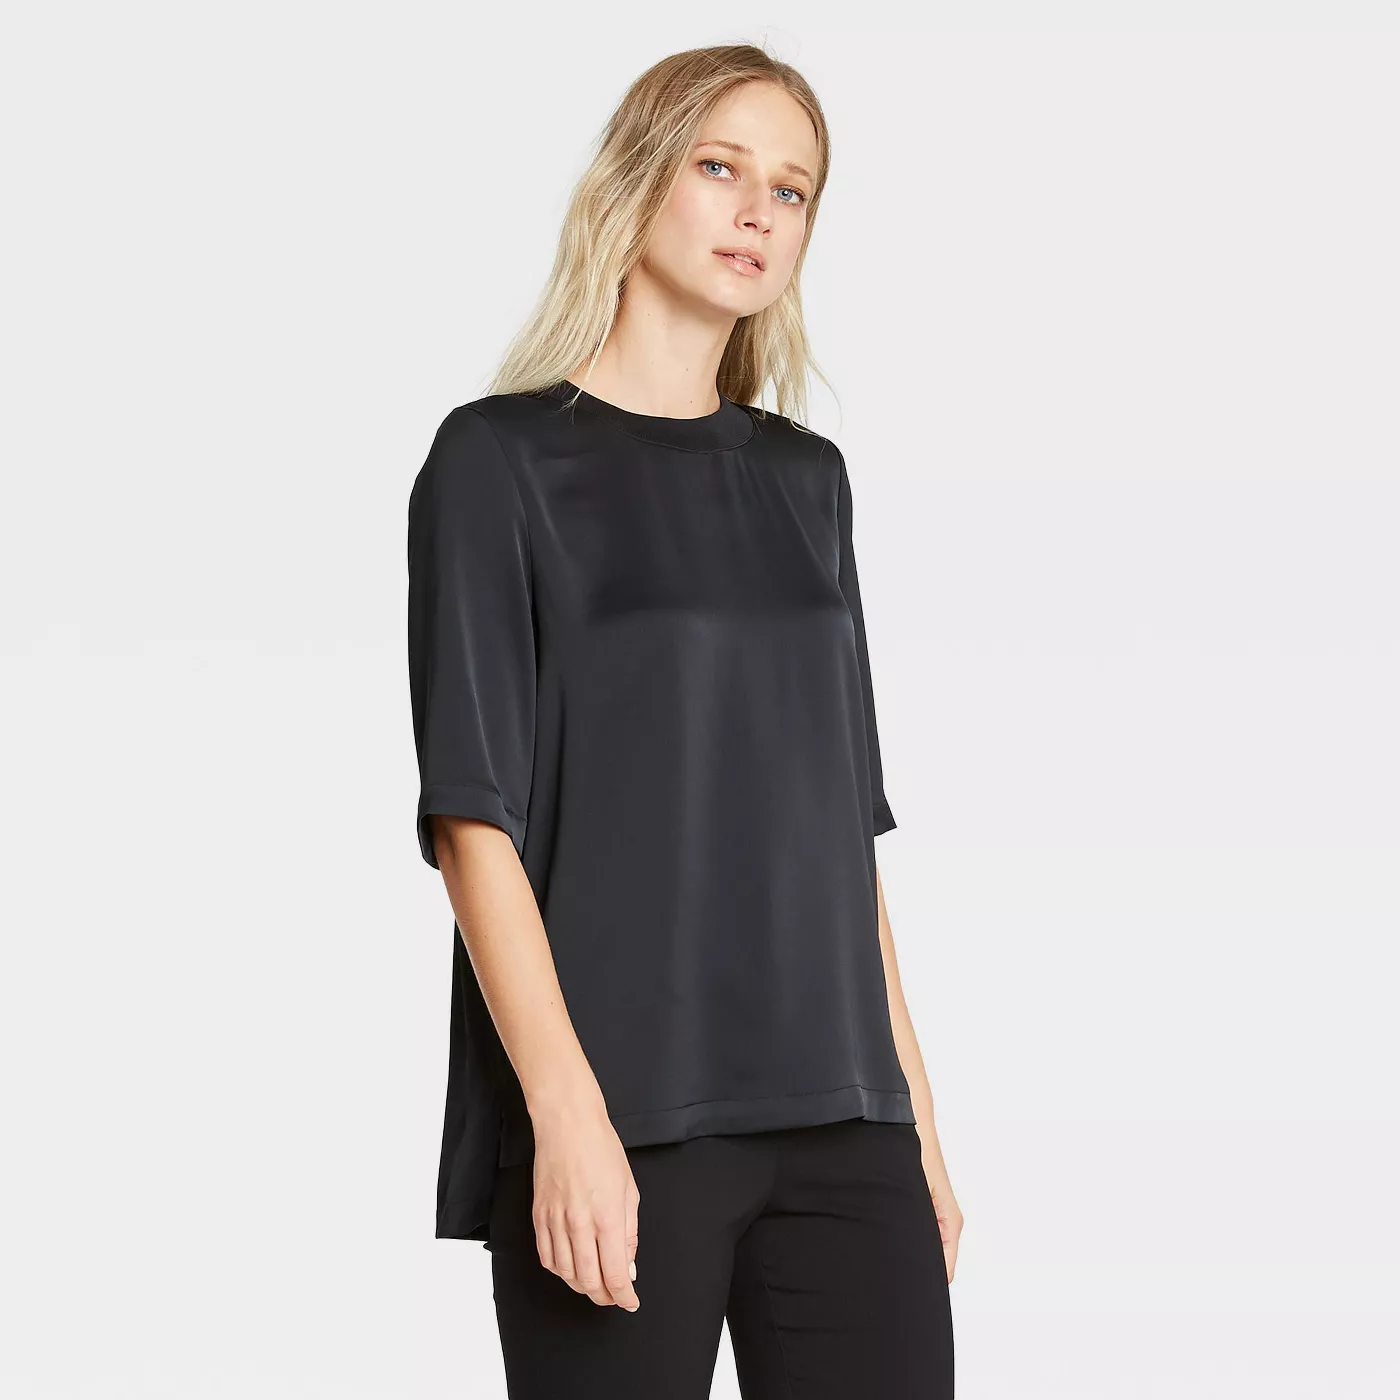 Women's Elbow Sleeve Silky Top - Who What Wear™  - image 1 of 6